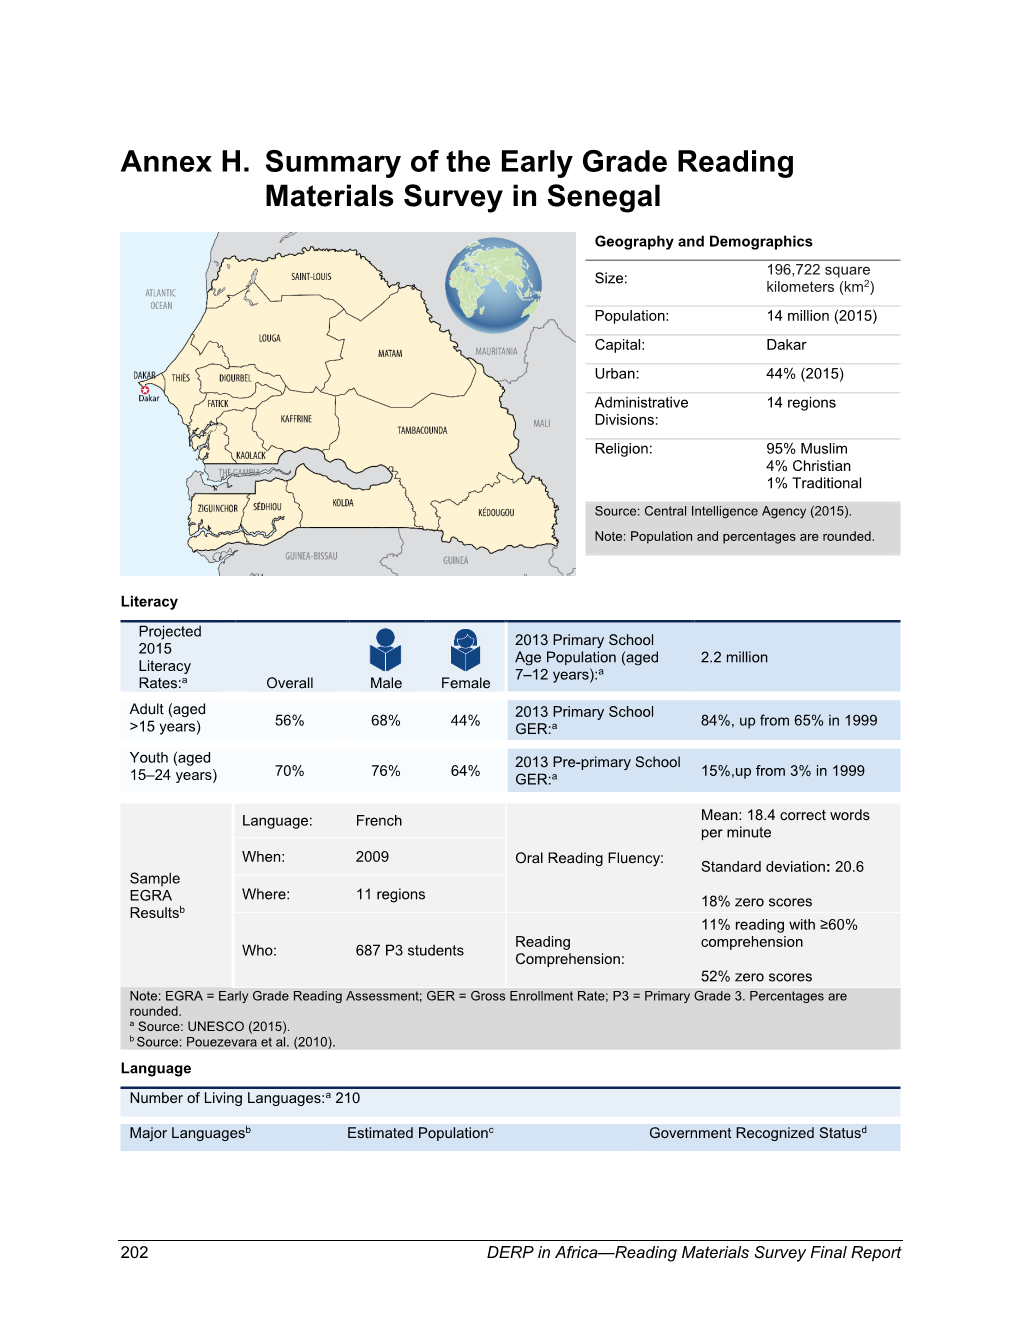 Annex H. Summary of the Early Grade Reading Materials Survey in Senegal